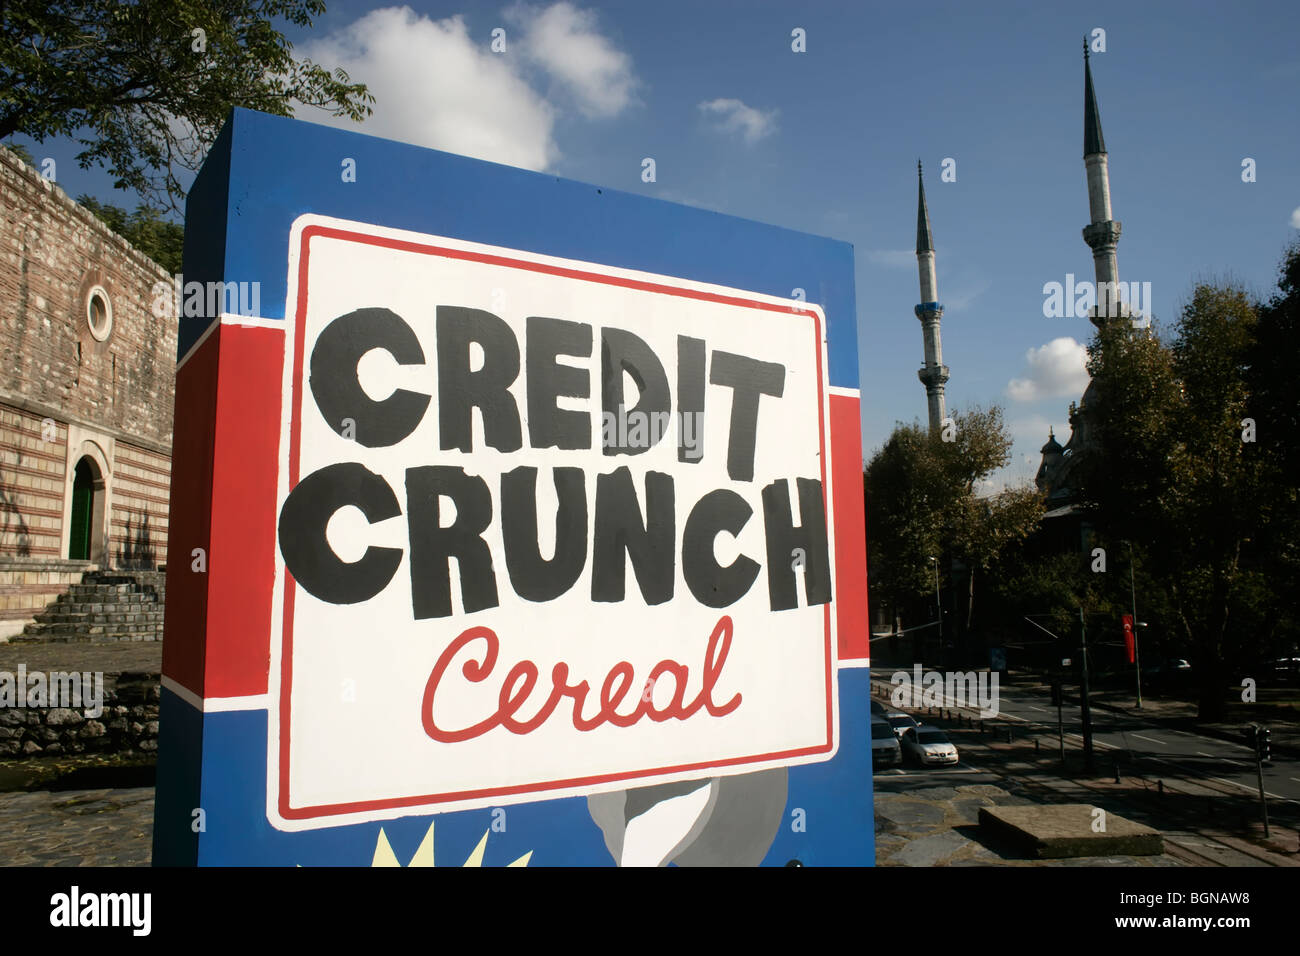 Credit Crunch Cereal exhibit at the City and Art exhibition in Tophane, Istanbul, Turkey Stock Photo